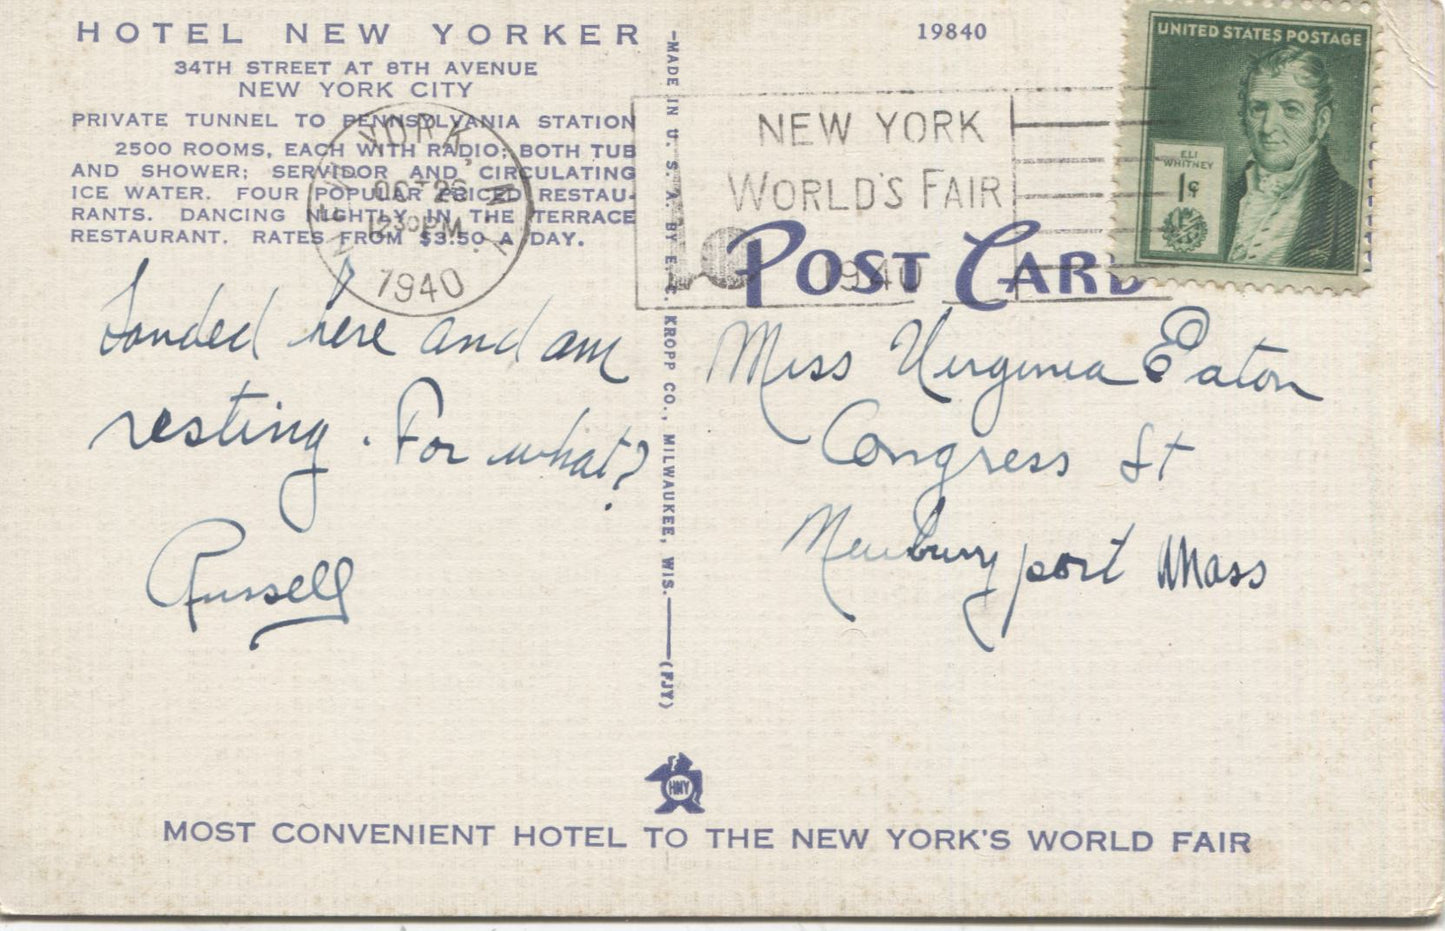 Hotel New Yorker, 34th Street at 8th Avenue, New York City Vintage Postcard